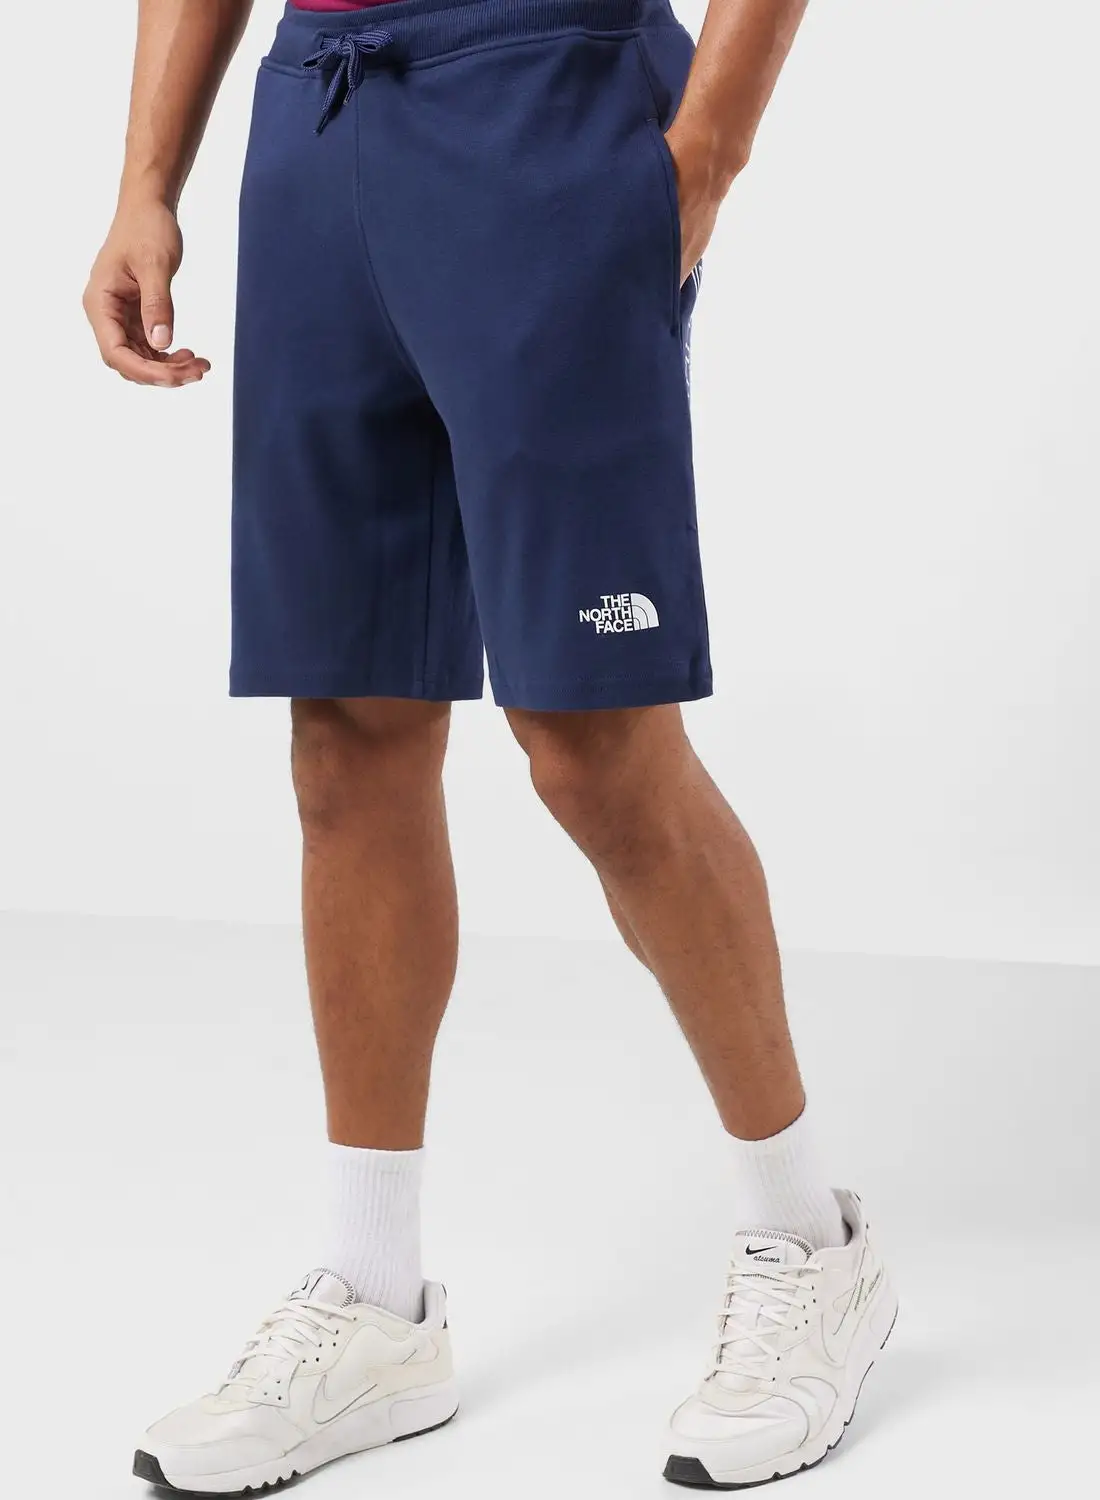 northface Essential Graphic Shorts